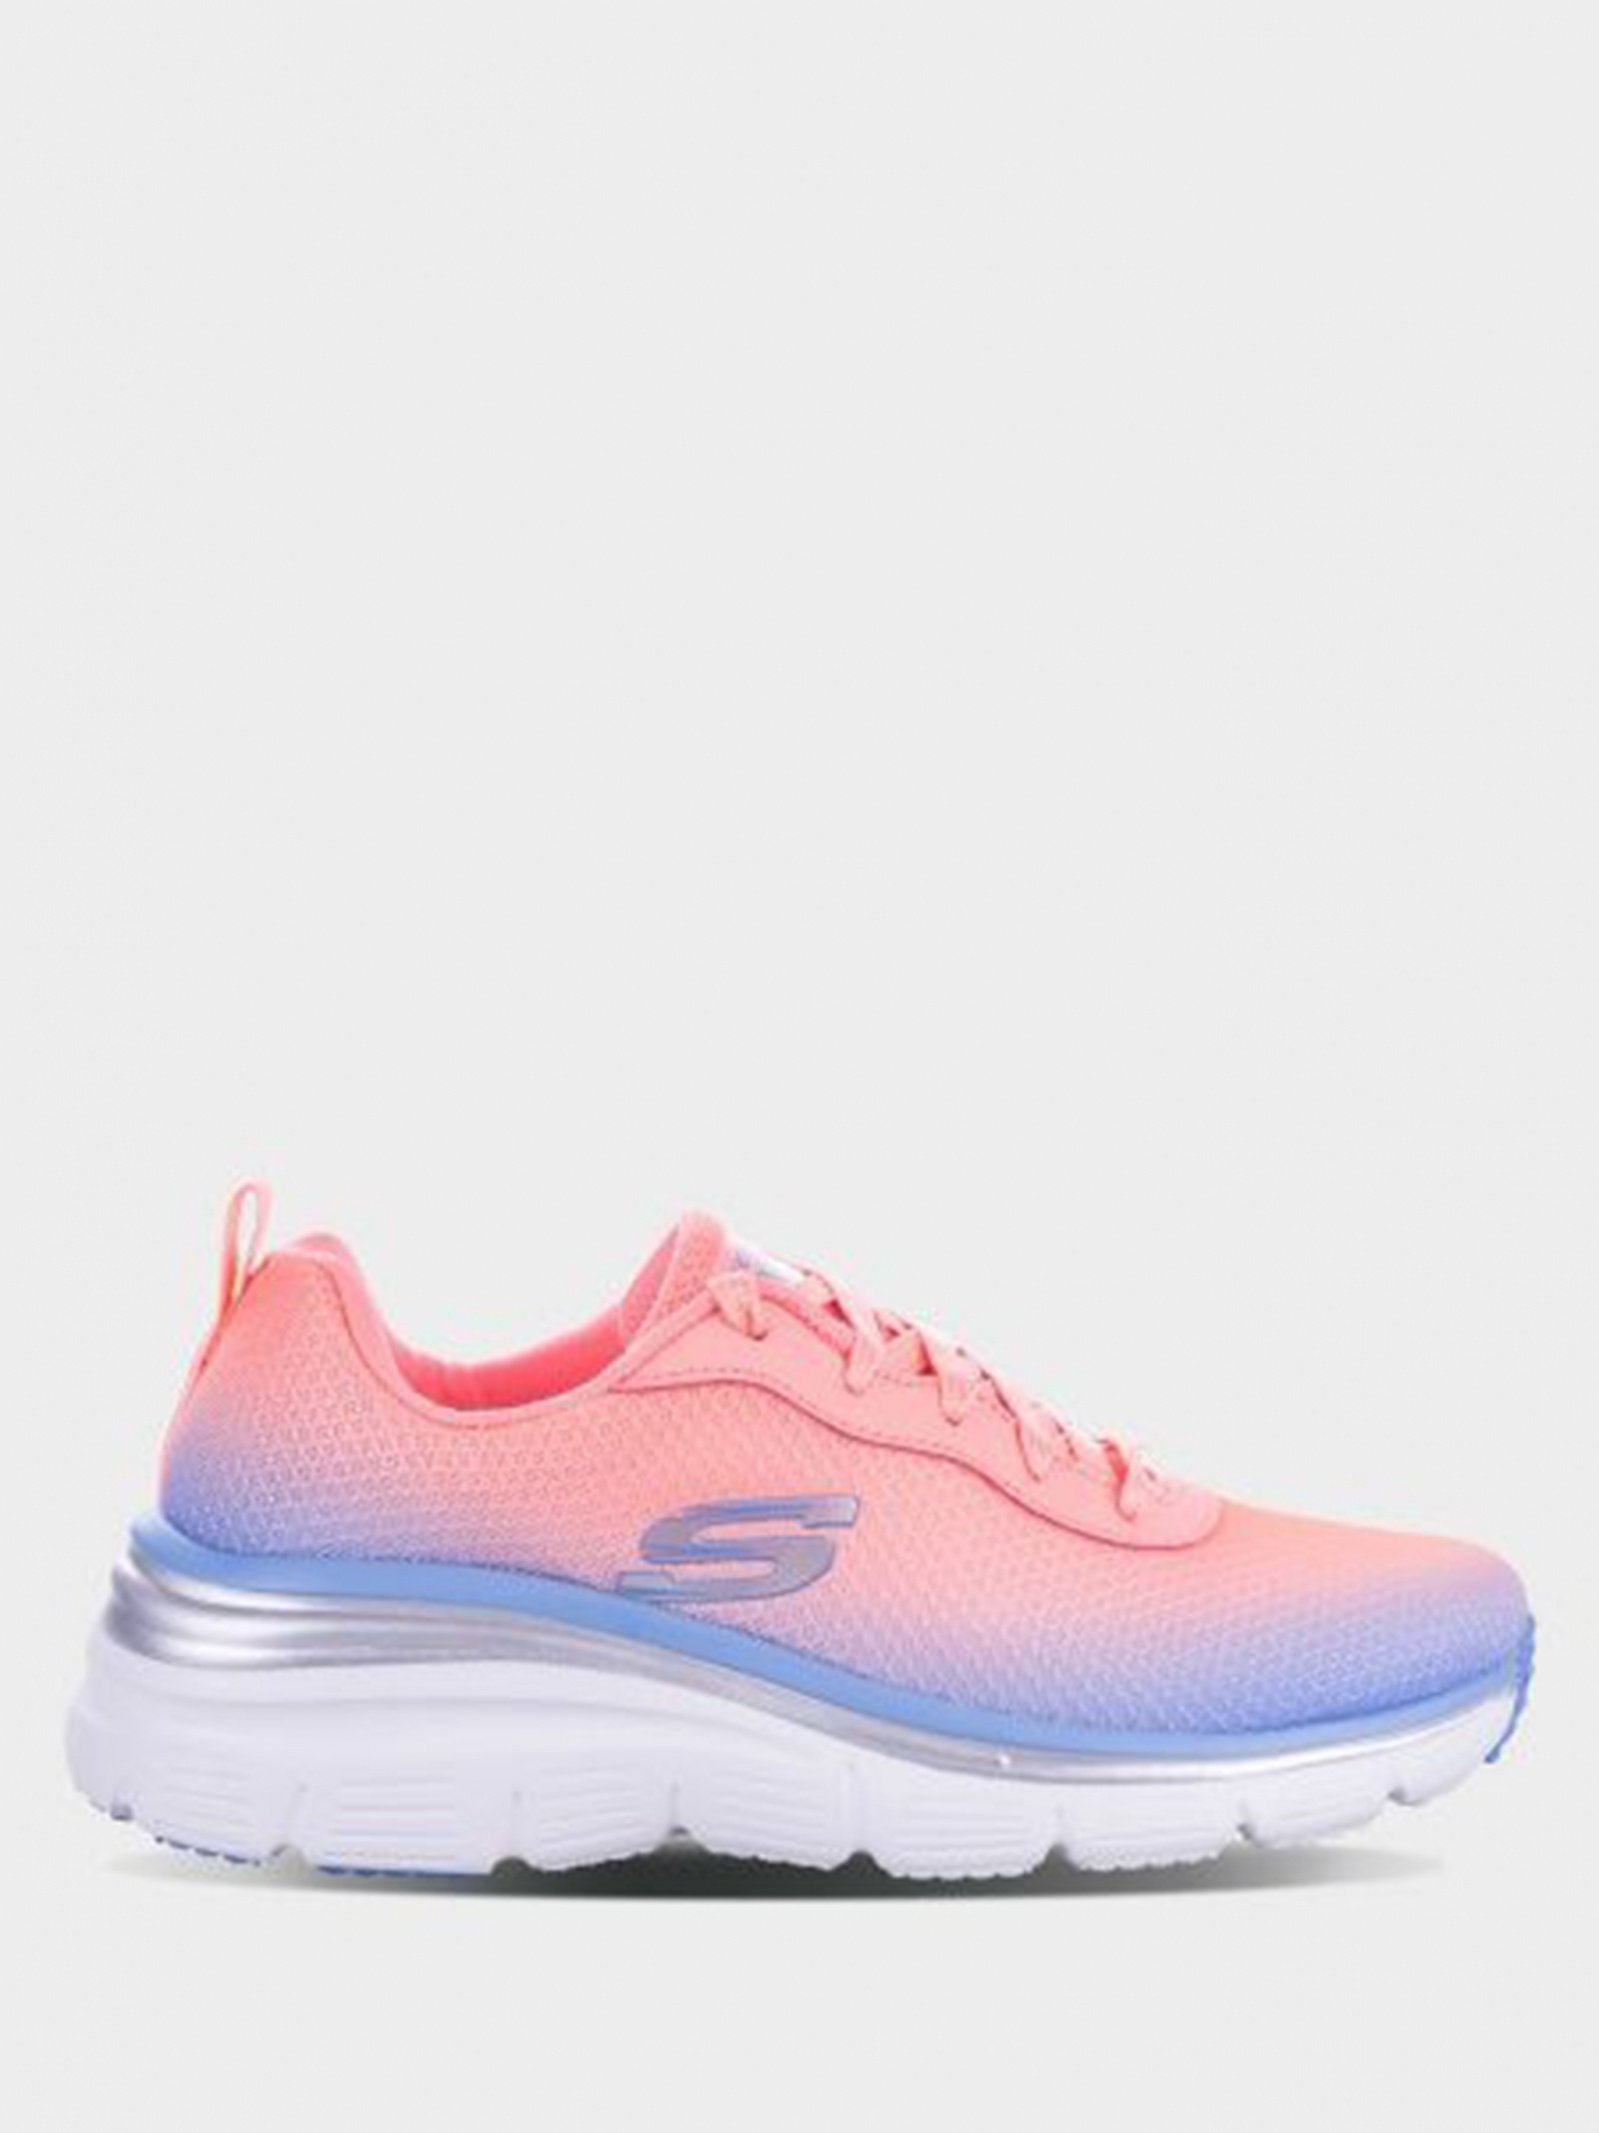 skechers fashion fit build up